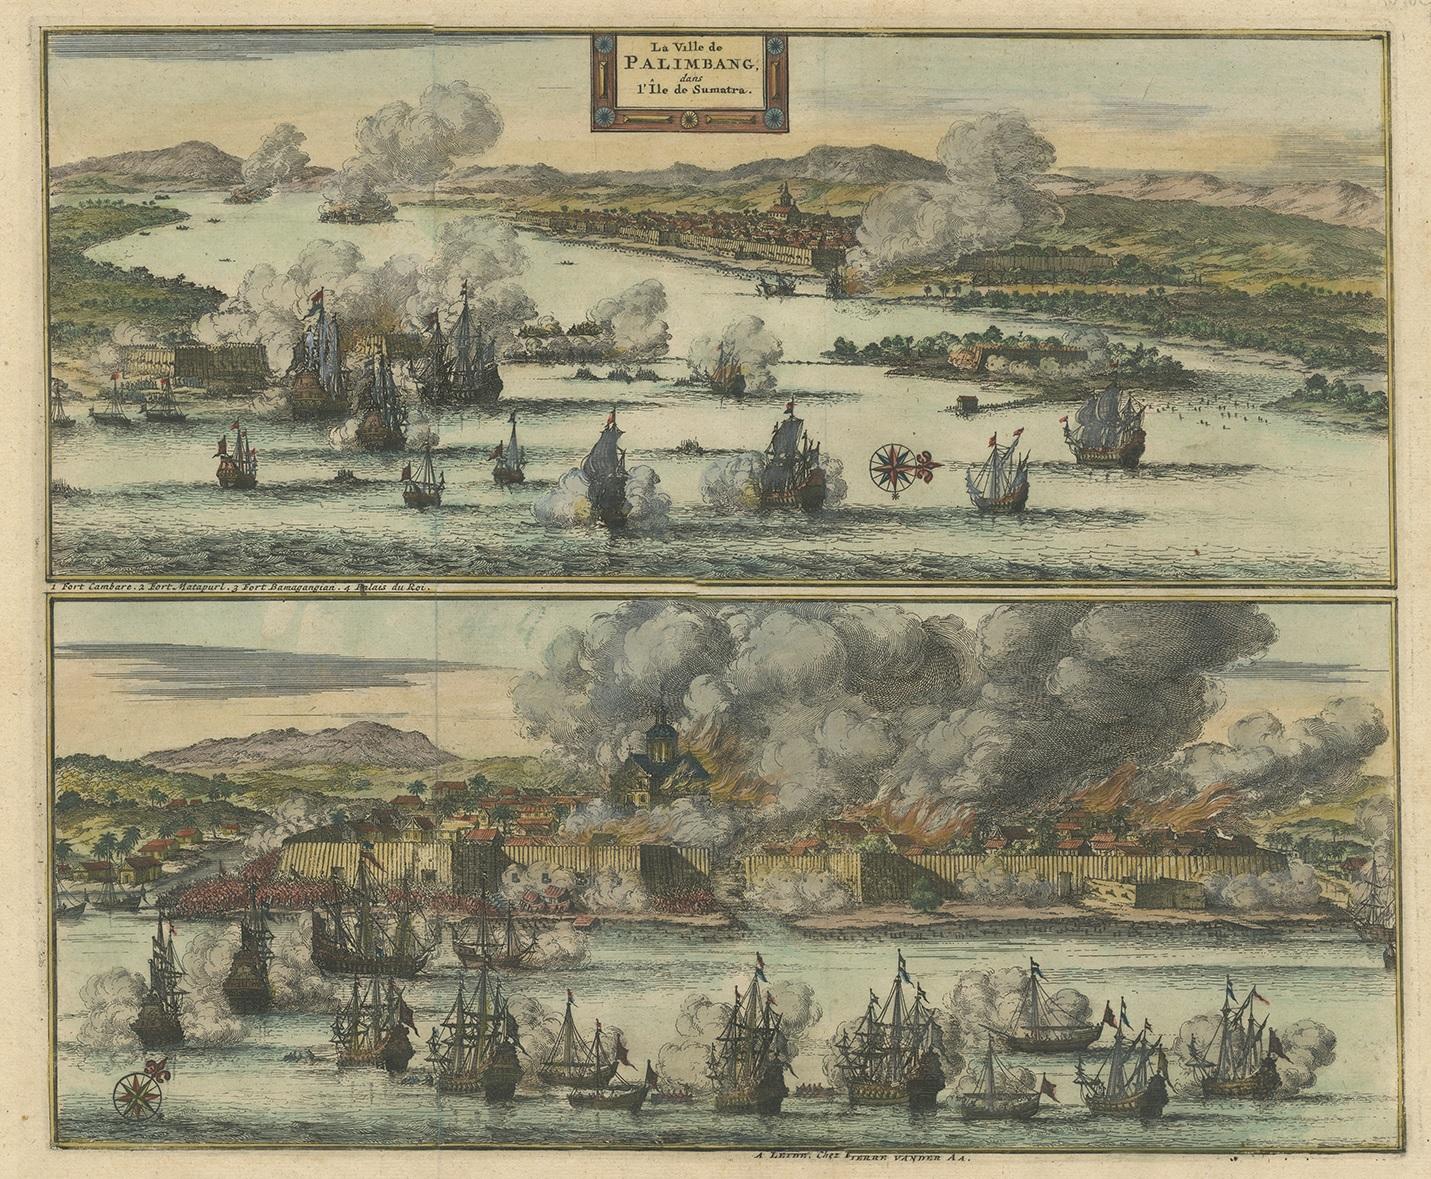 Antique print titled 'La Ville de Palimbang dans L’Ile de Sumatra.' A very decorative, impressive engraving of Palembang in Sumatra. Two views on one sheet. In the upper part the overall view with a sea battle in the foreground. Below the burning